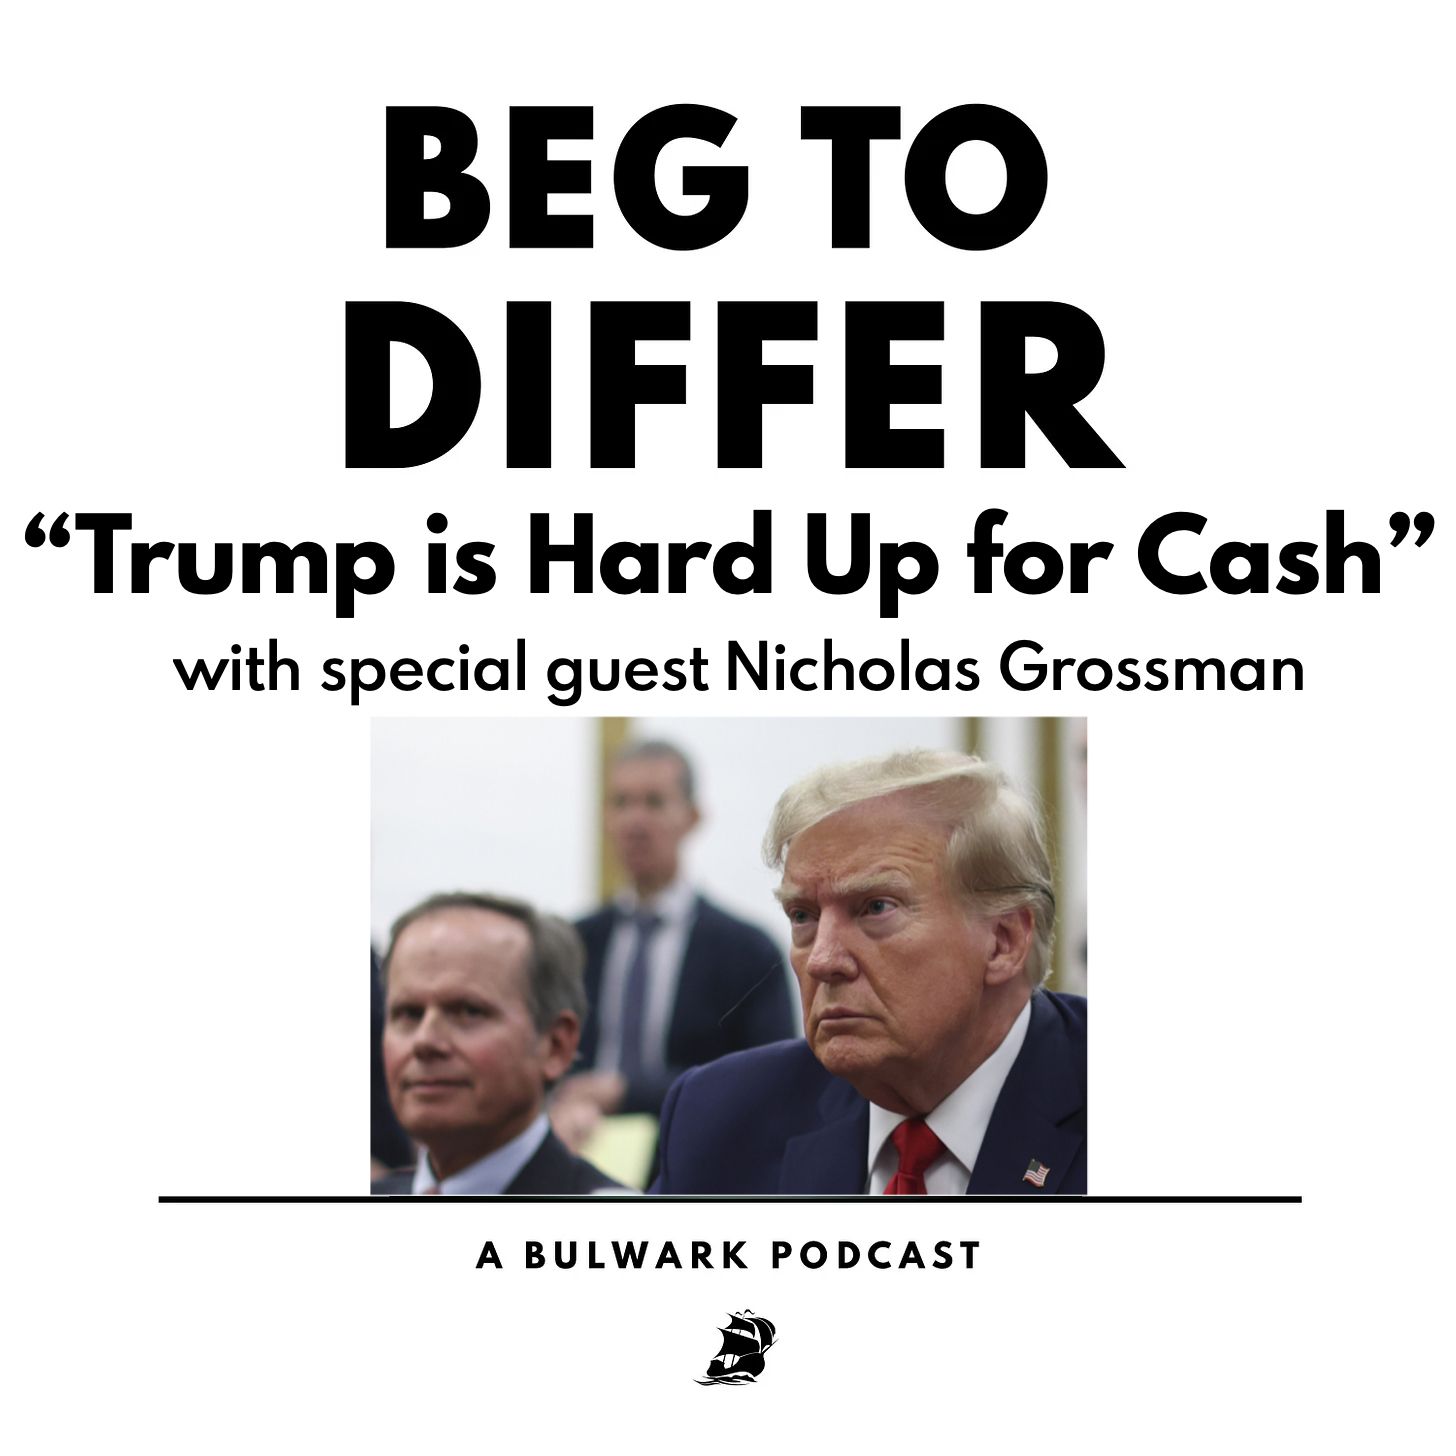 Trump is Hard Up for Cash